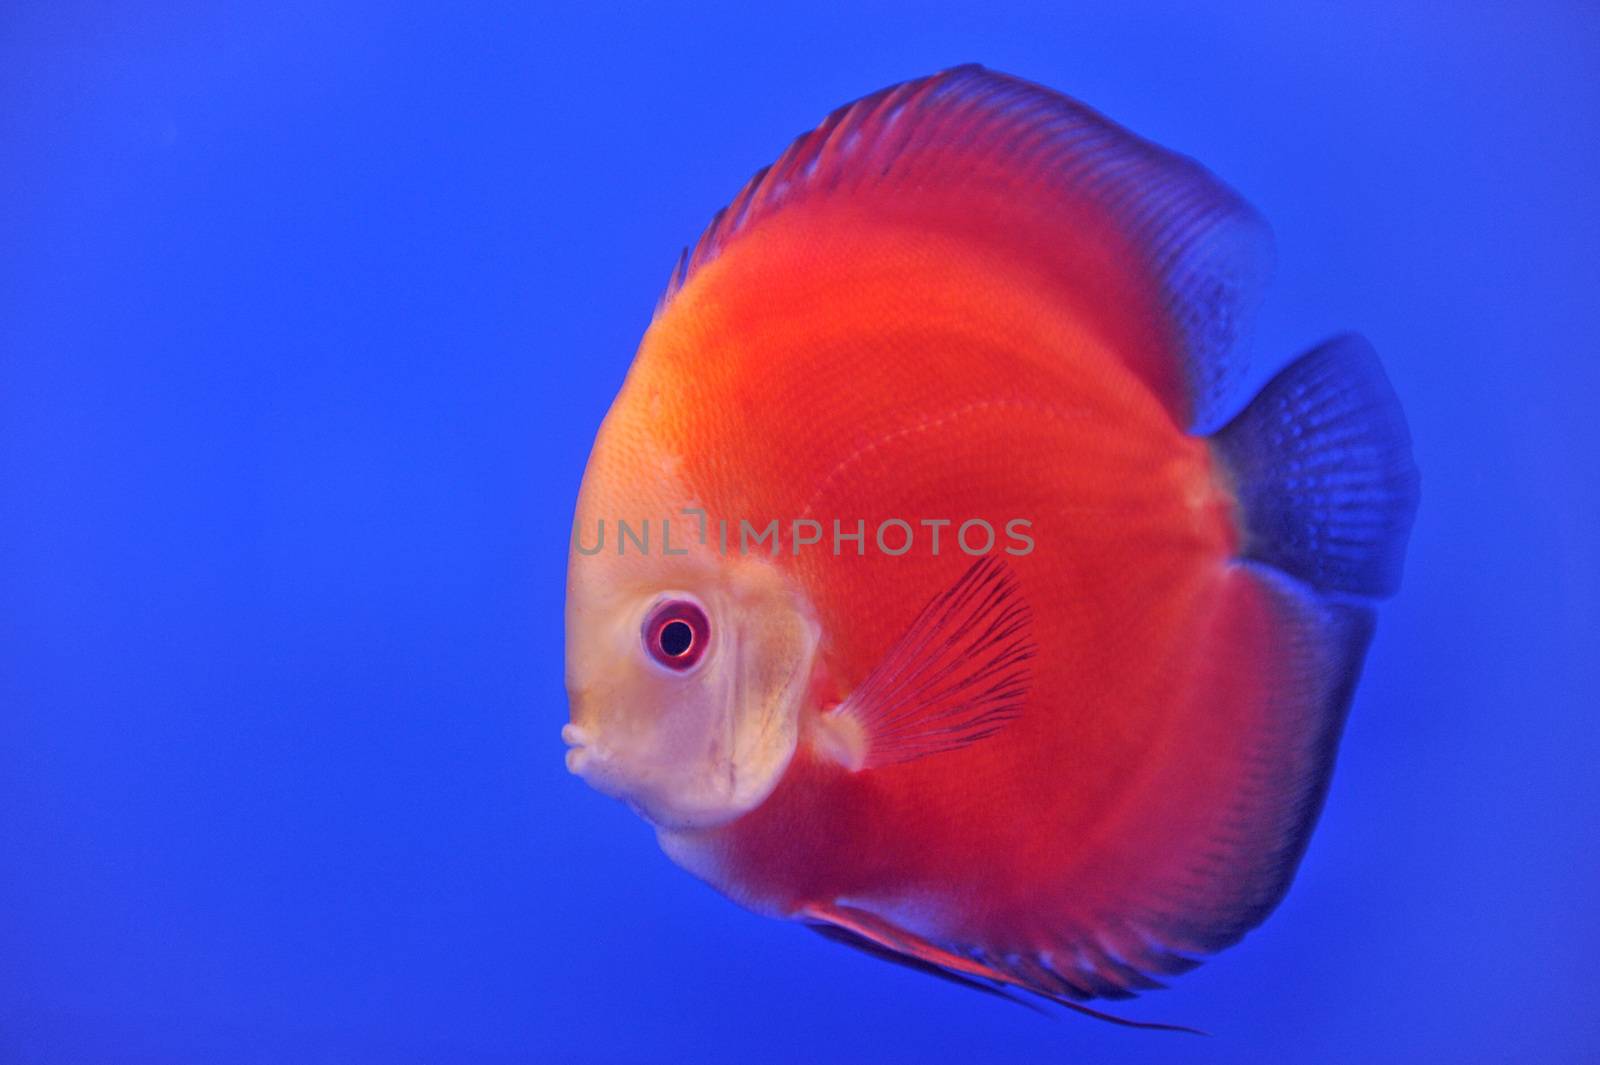 discus in an aquarium on a blue background by think4photop